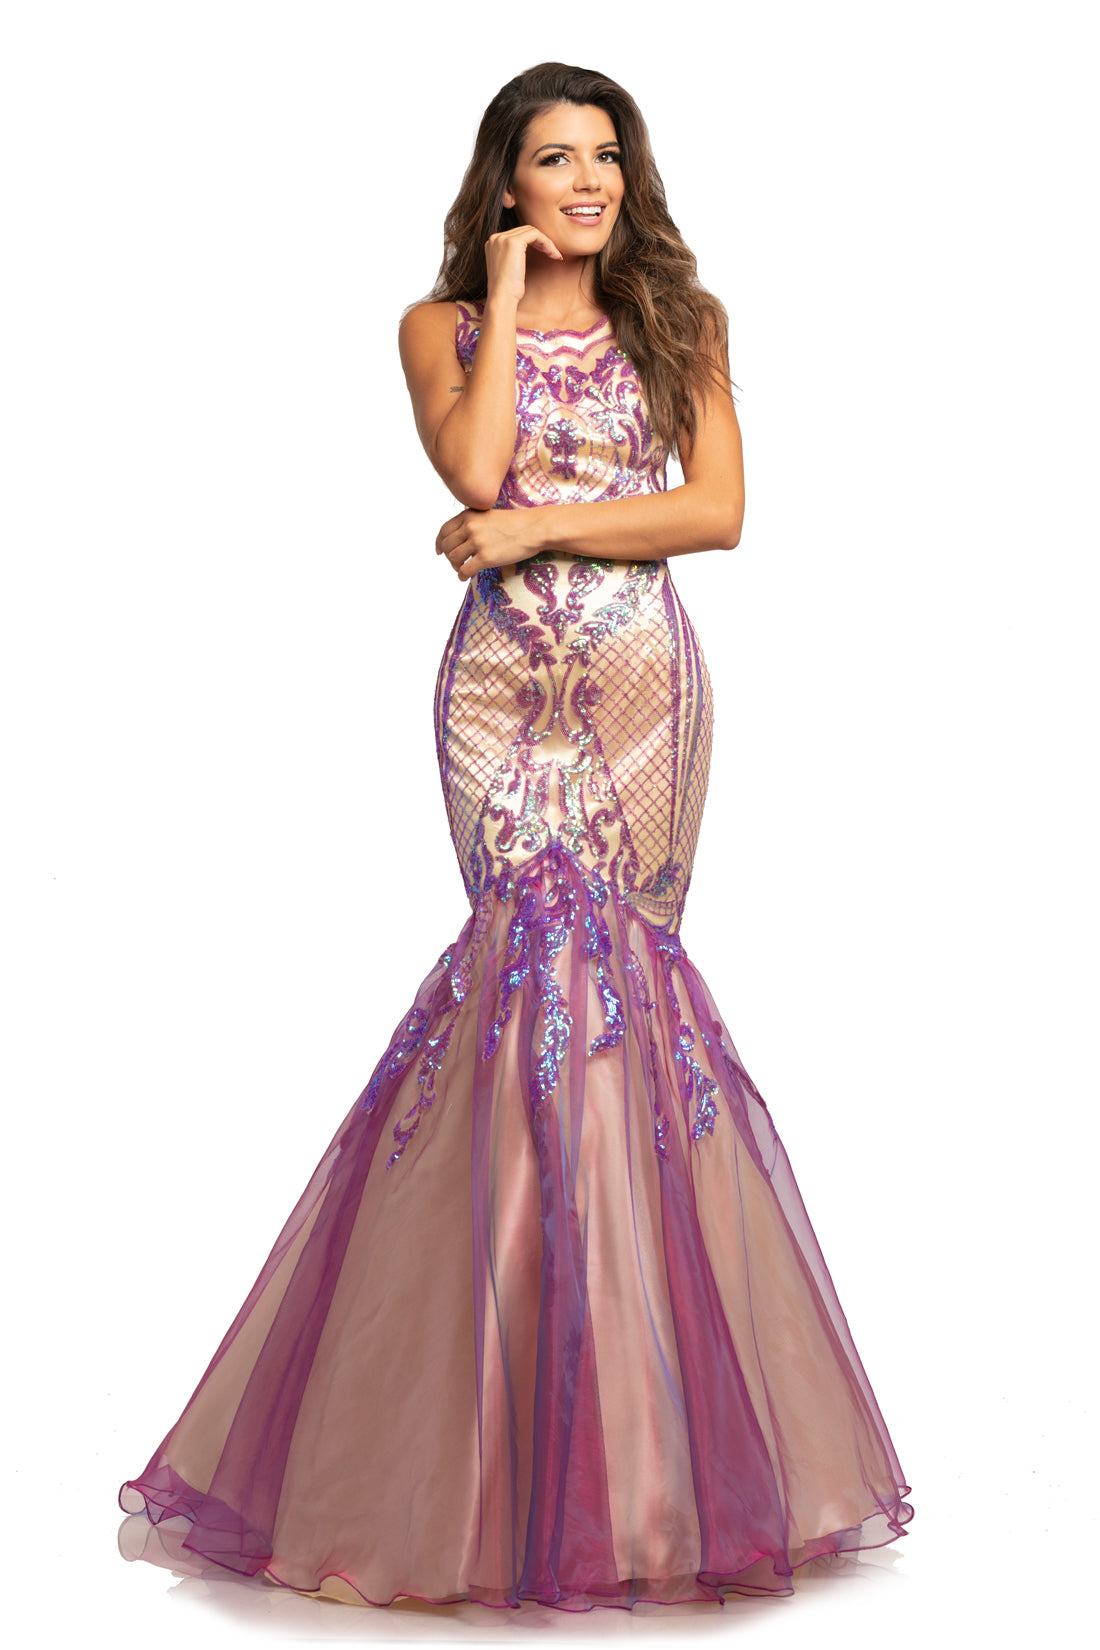 Johnathan Kayne 2018 is a sequin mermaid Prom Dress, Pageant Gown & Formal Evening Wear. Featuring a Sexy Fitted Mermaid Silhouette. High Neckline. Sequin Embellished Bodice with scallop edge. Fit & Flare Leads to a Lush Trumpet Skirt with Iridescent Organza. Sequin Embellishments cascade from the Embellished bodice into the Shimmer Skirt. 